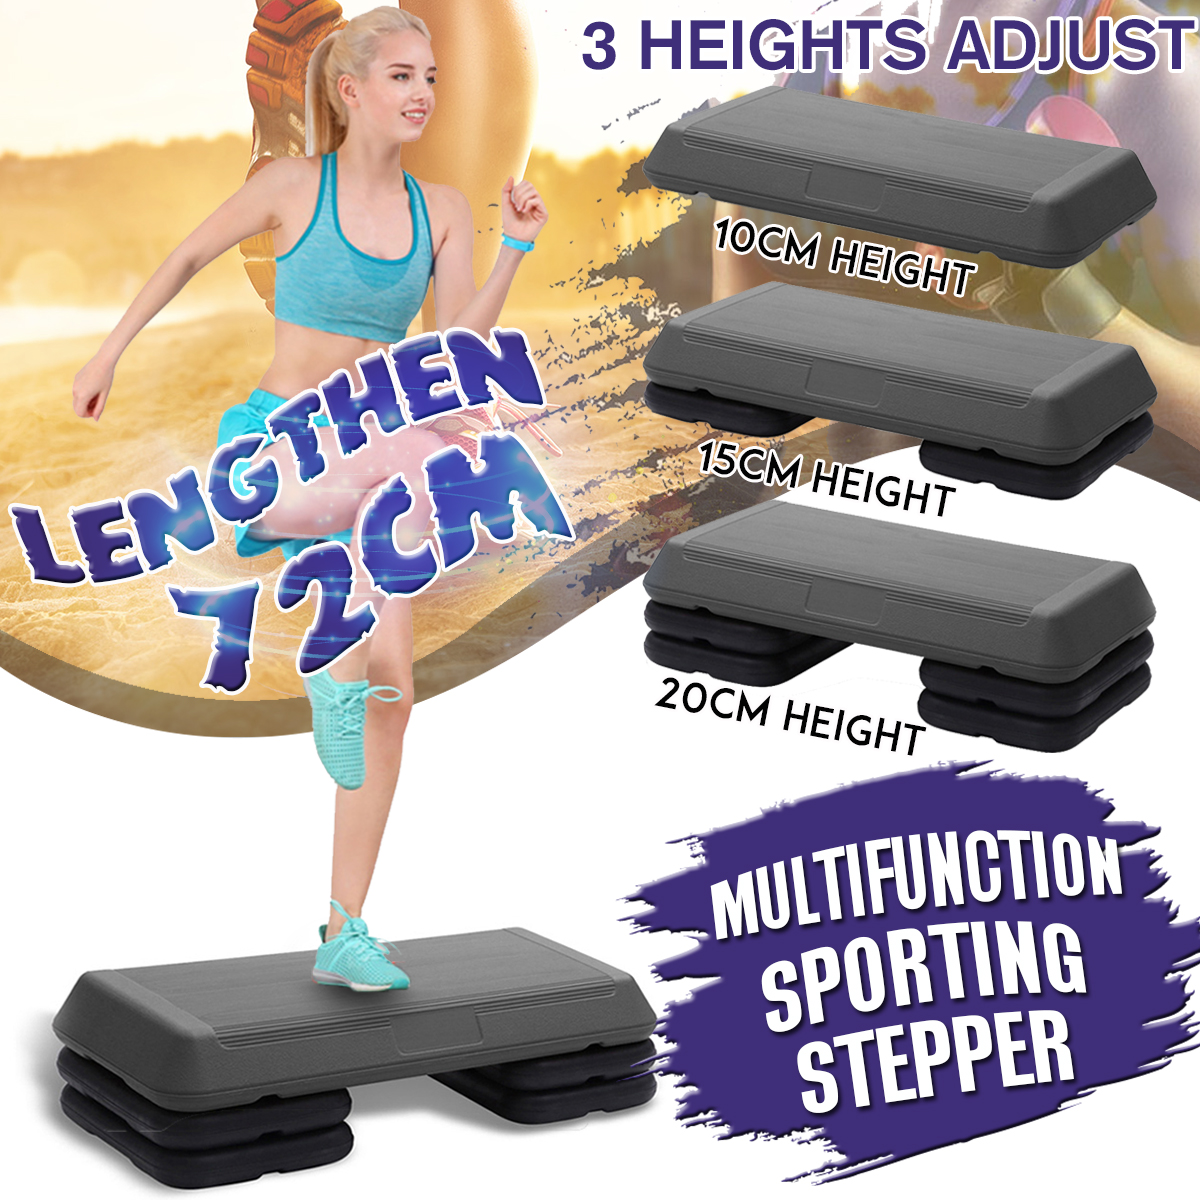 3 Level Adjustable Aerobic Step Platform Exercise Accessory for Home Gym Cardio Workout 